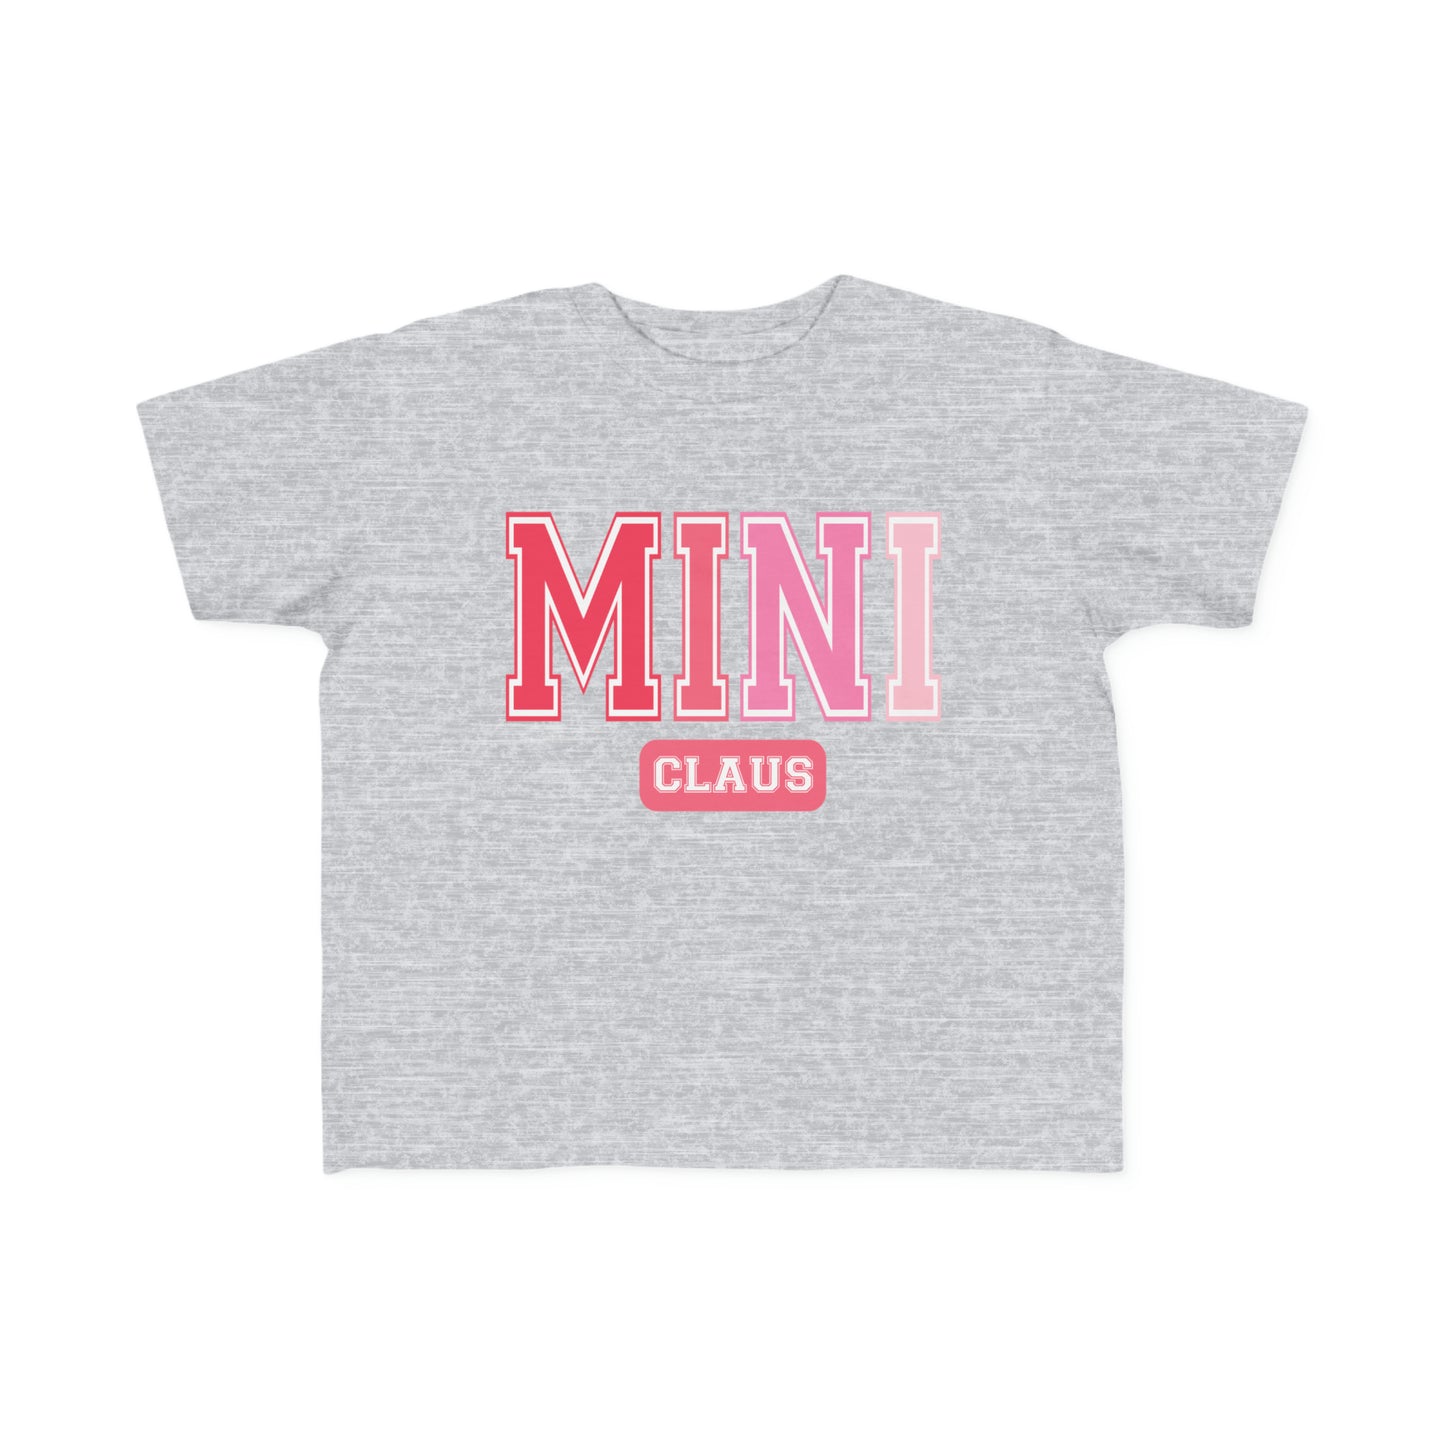 Mini Claus Christmas Toddler's Fine Jersey Tee